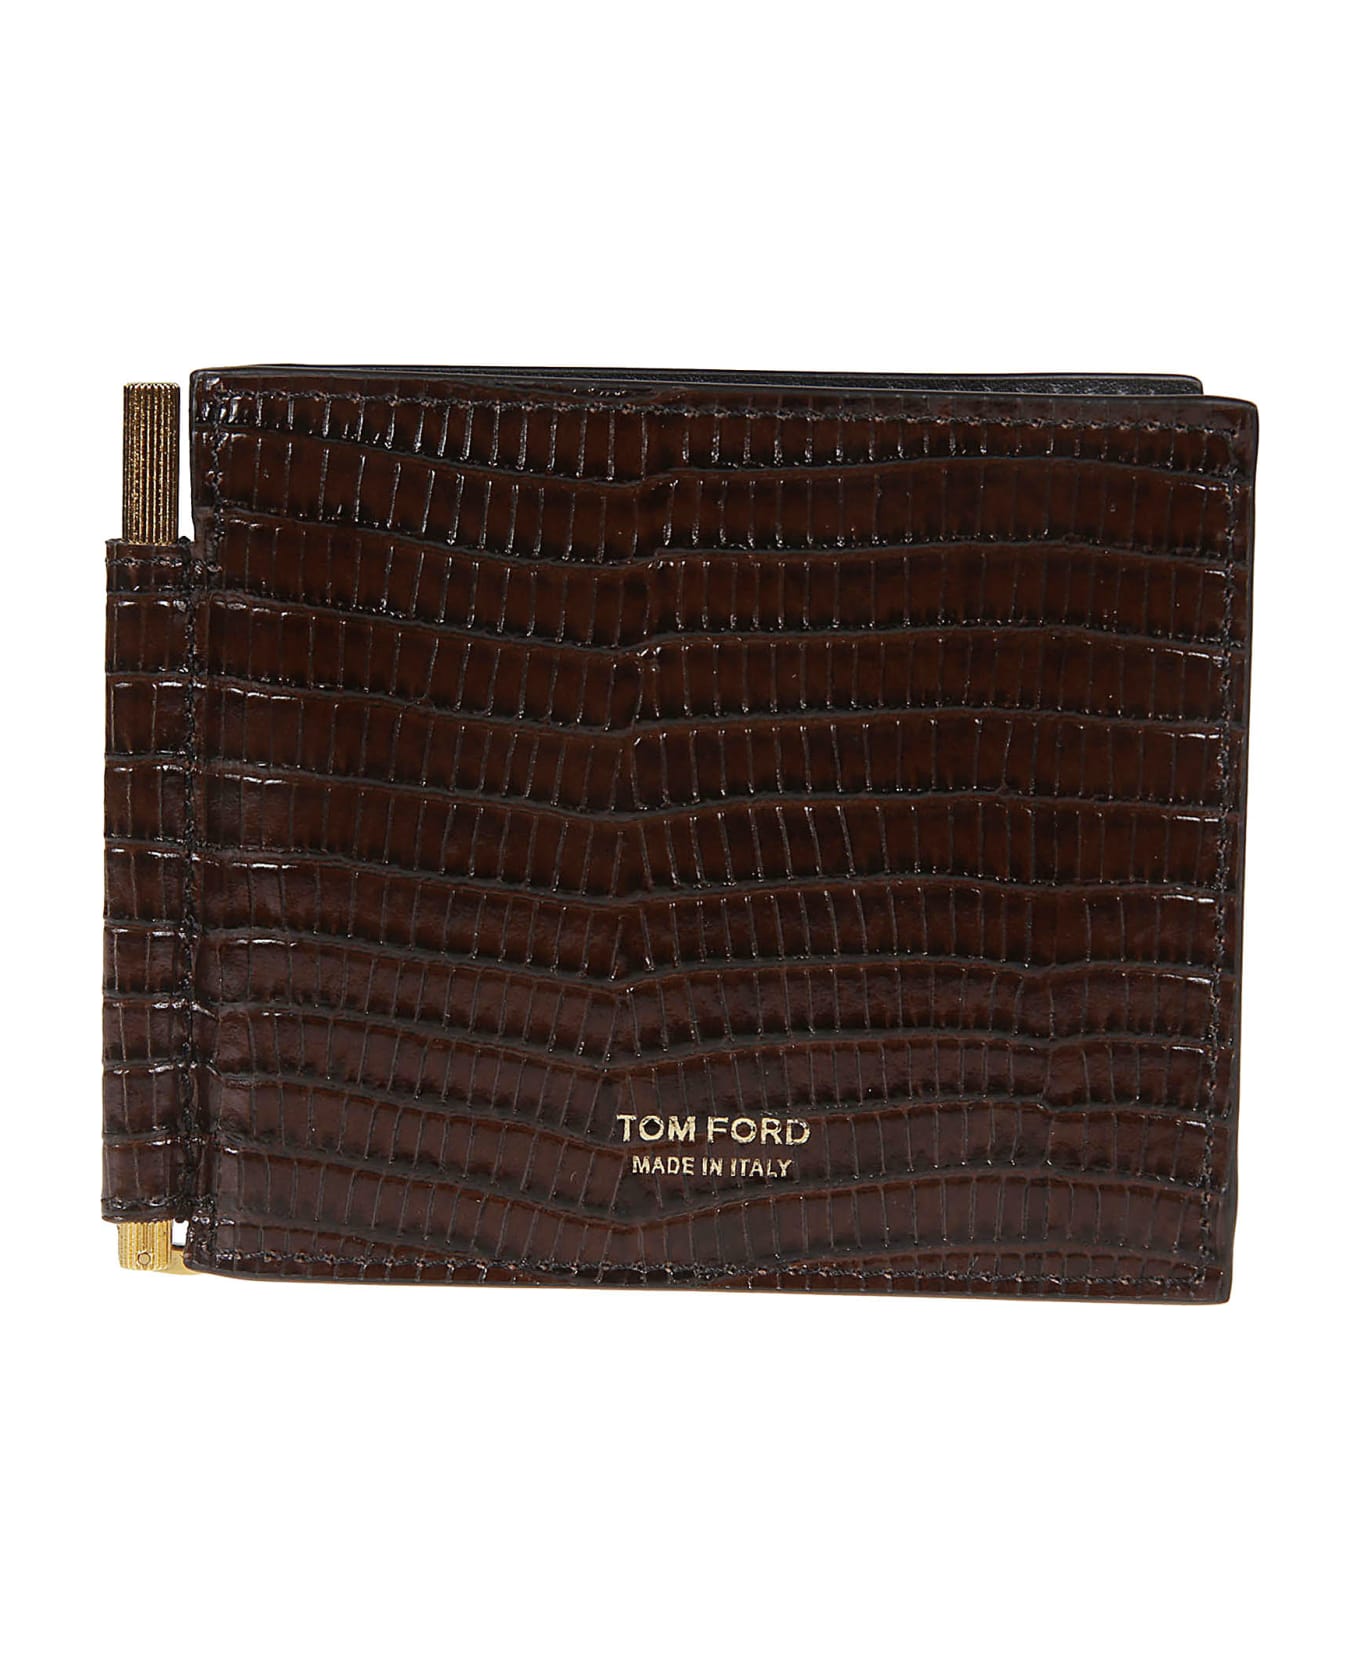 Tom Ford Printed Alligator Money Clip Wallet - Chicolate Brown